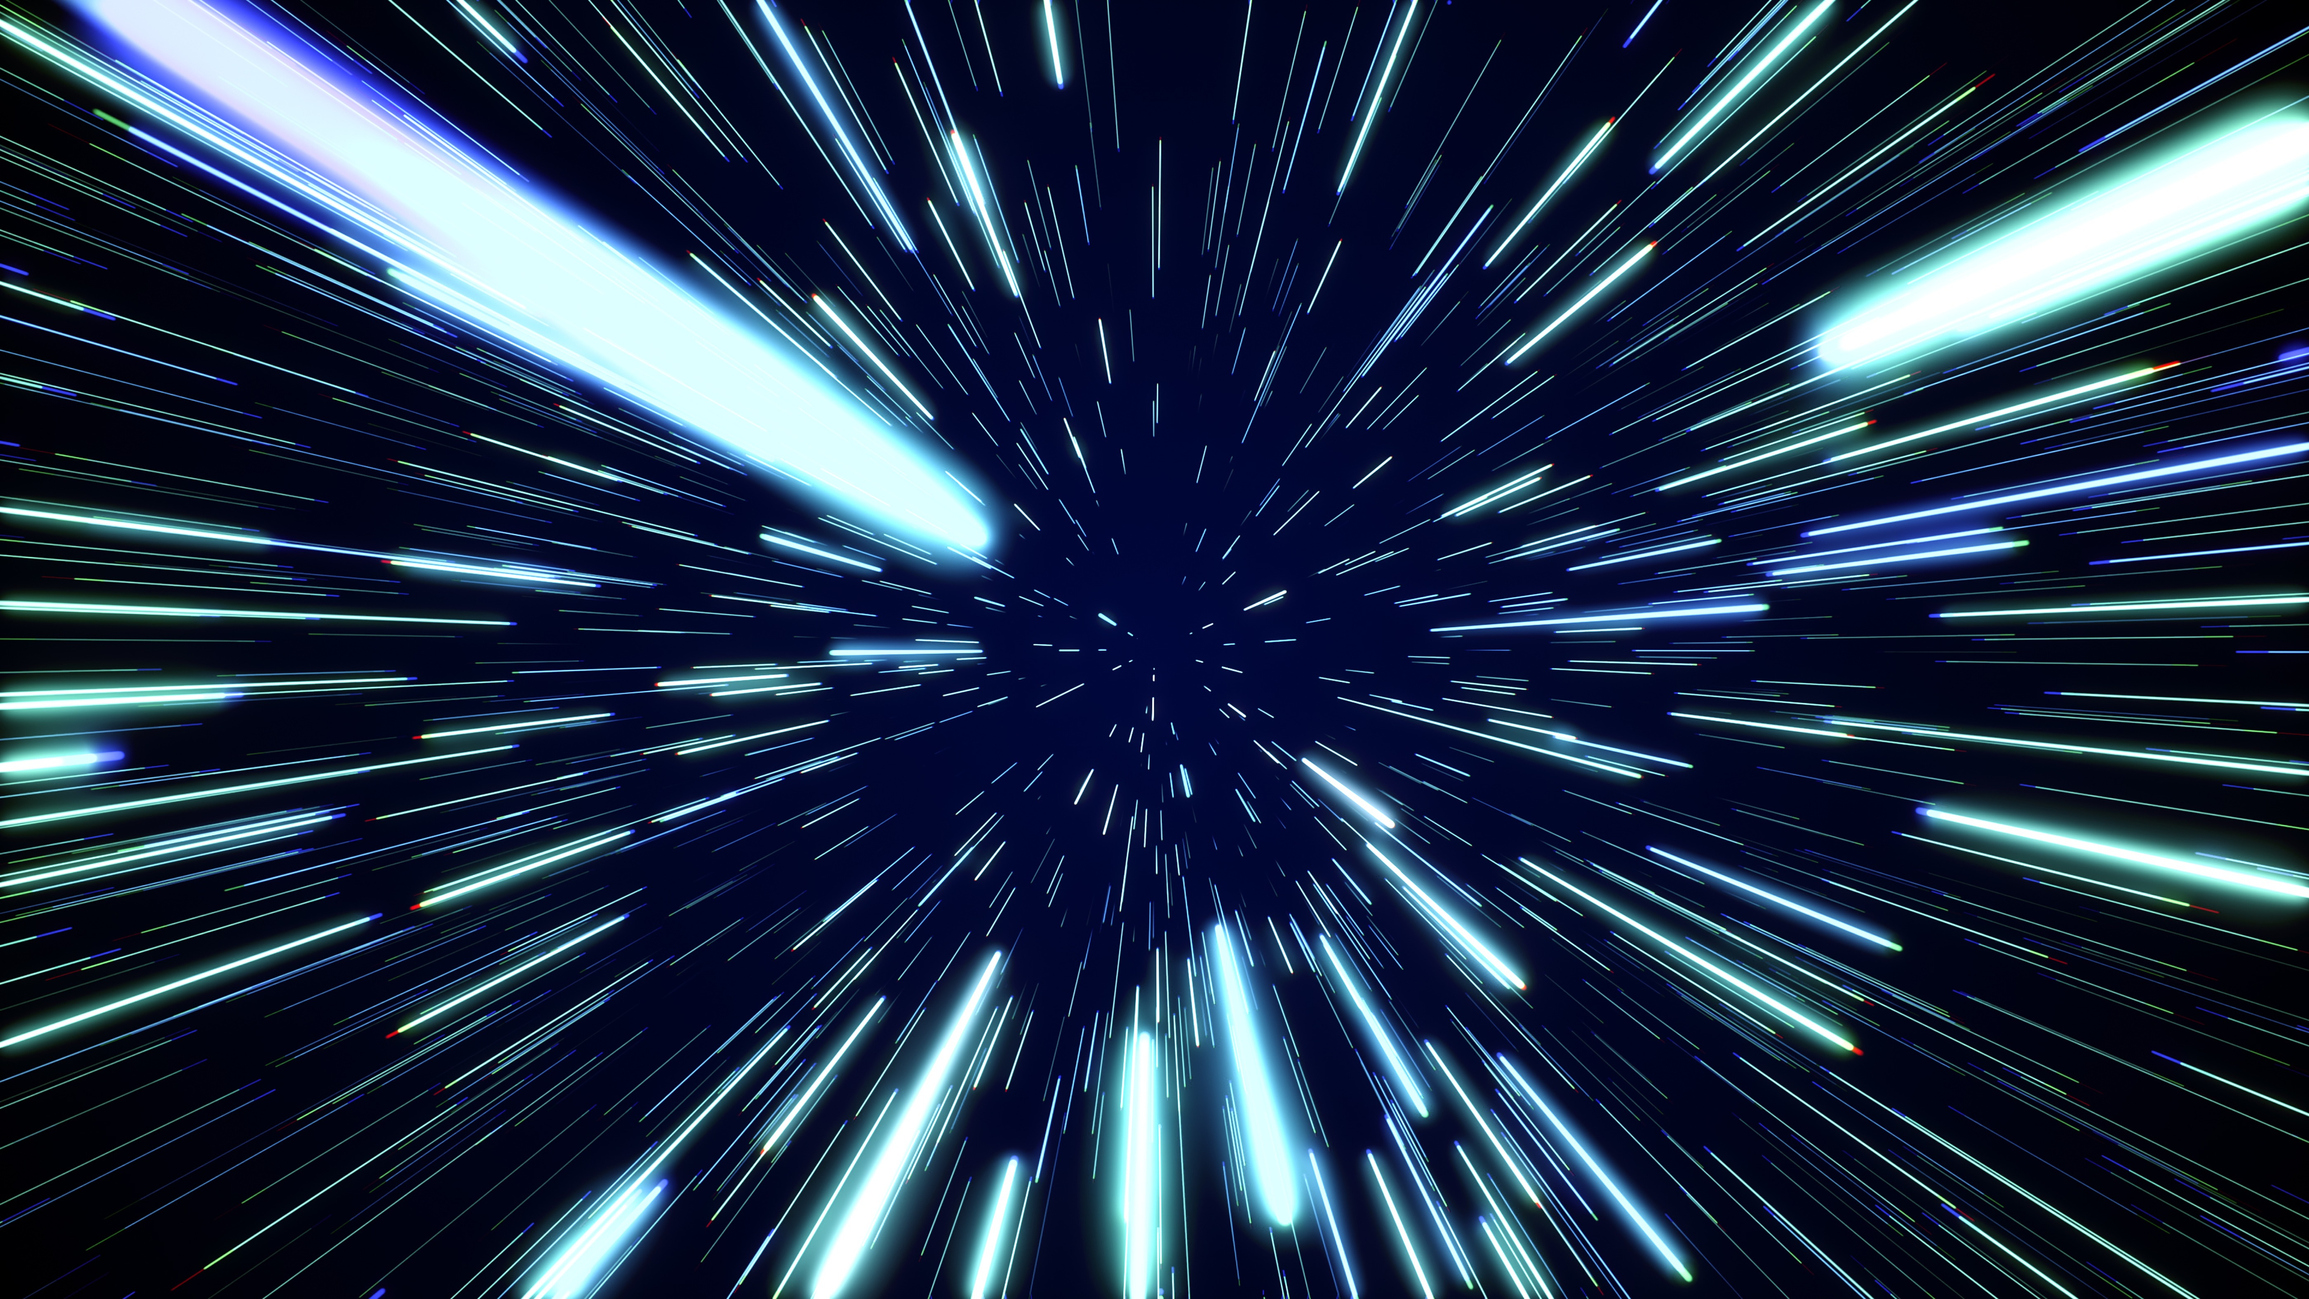 Warp speed is theoretically possible.